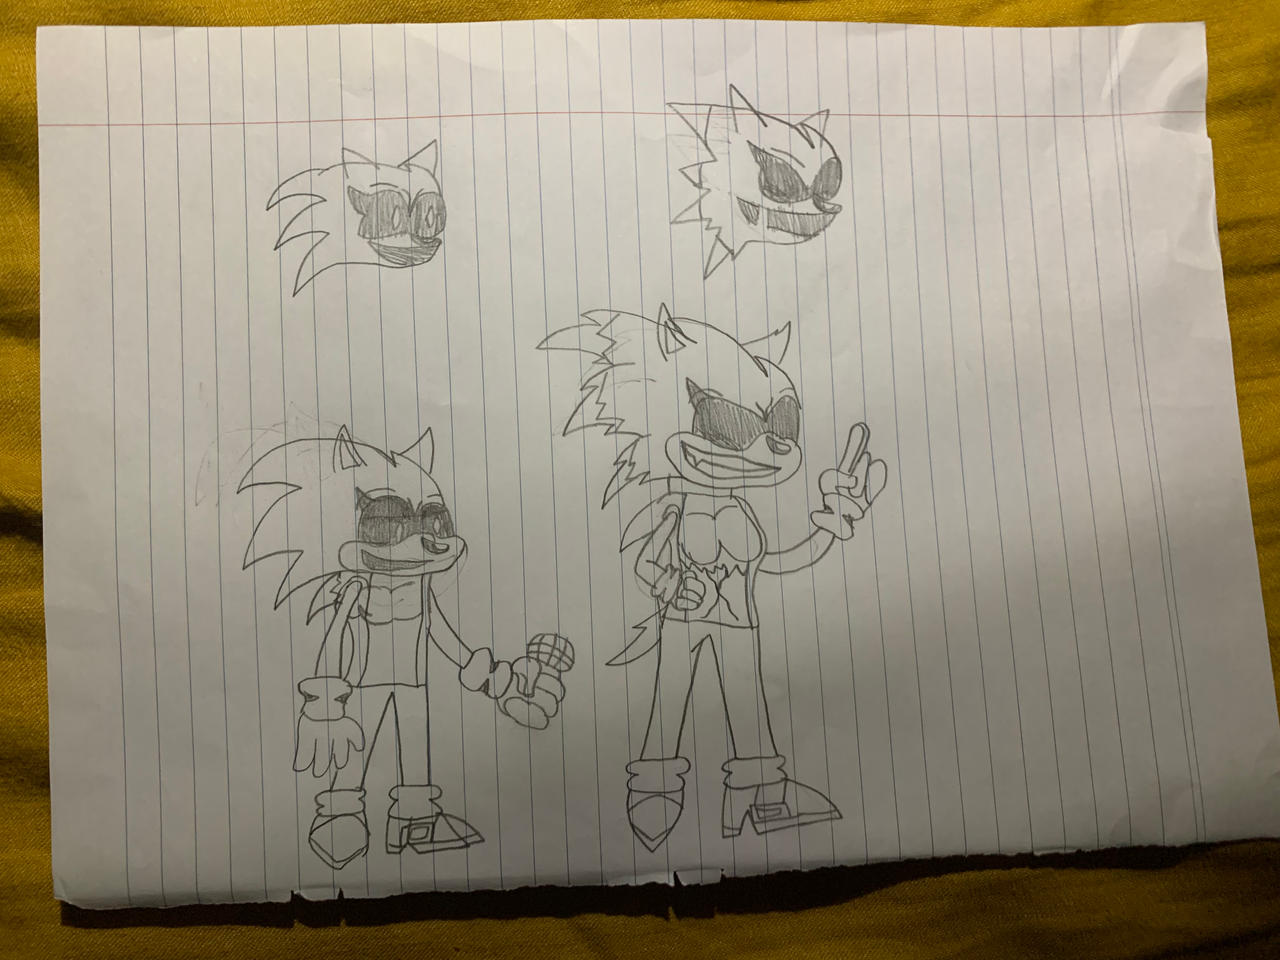 Since Fleetway Super Sonic roasted Sonic.exe and Majin Sonic, here